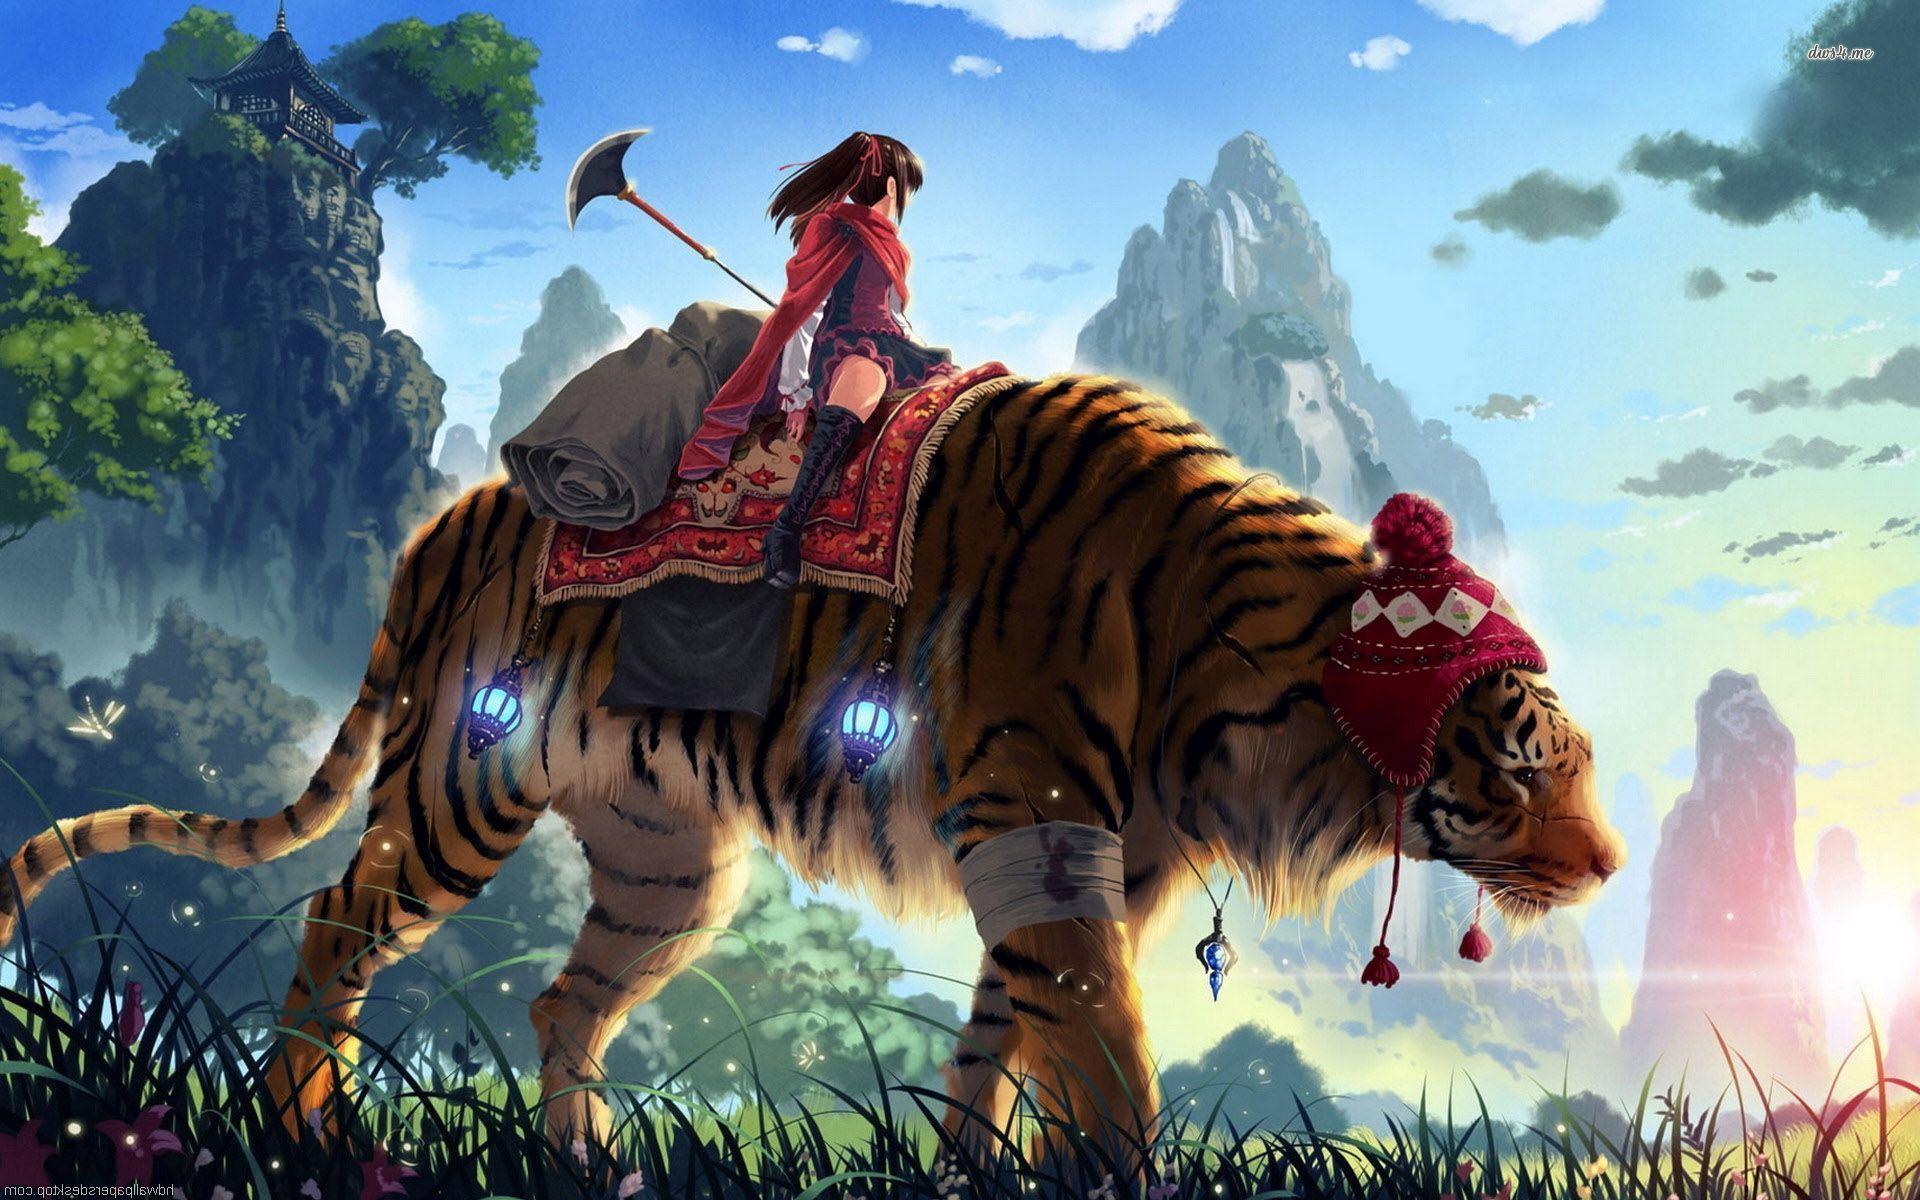 Giant Tiger in a Peruvian hat. HD anime wallpaper, Tiger wallpaper, Anime wallpaper